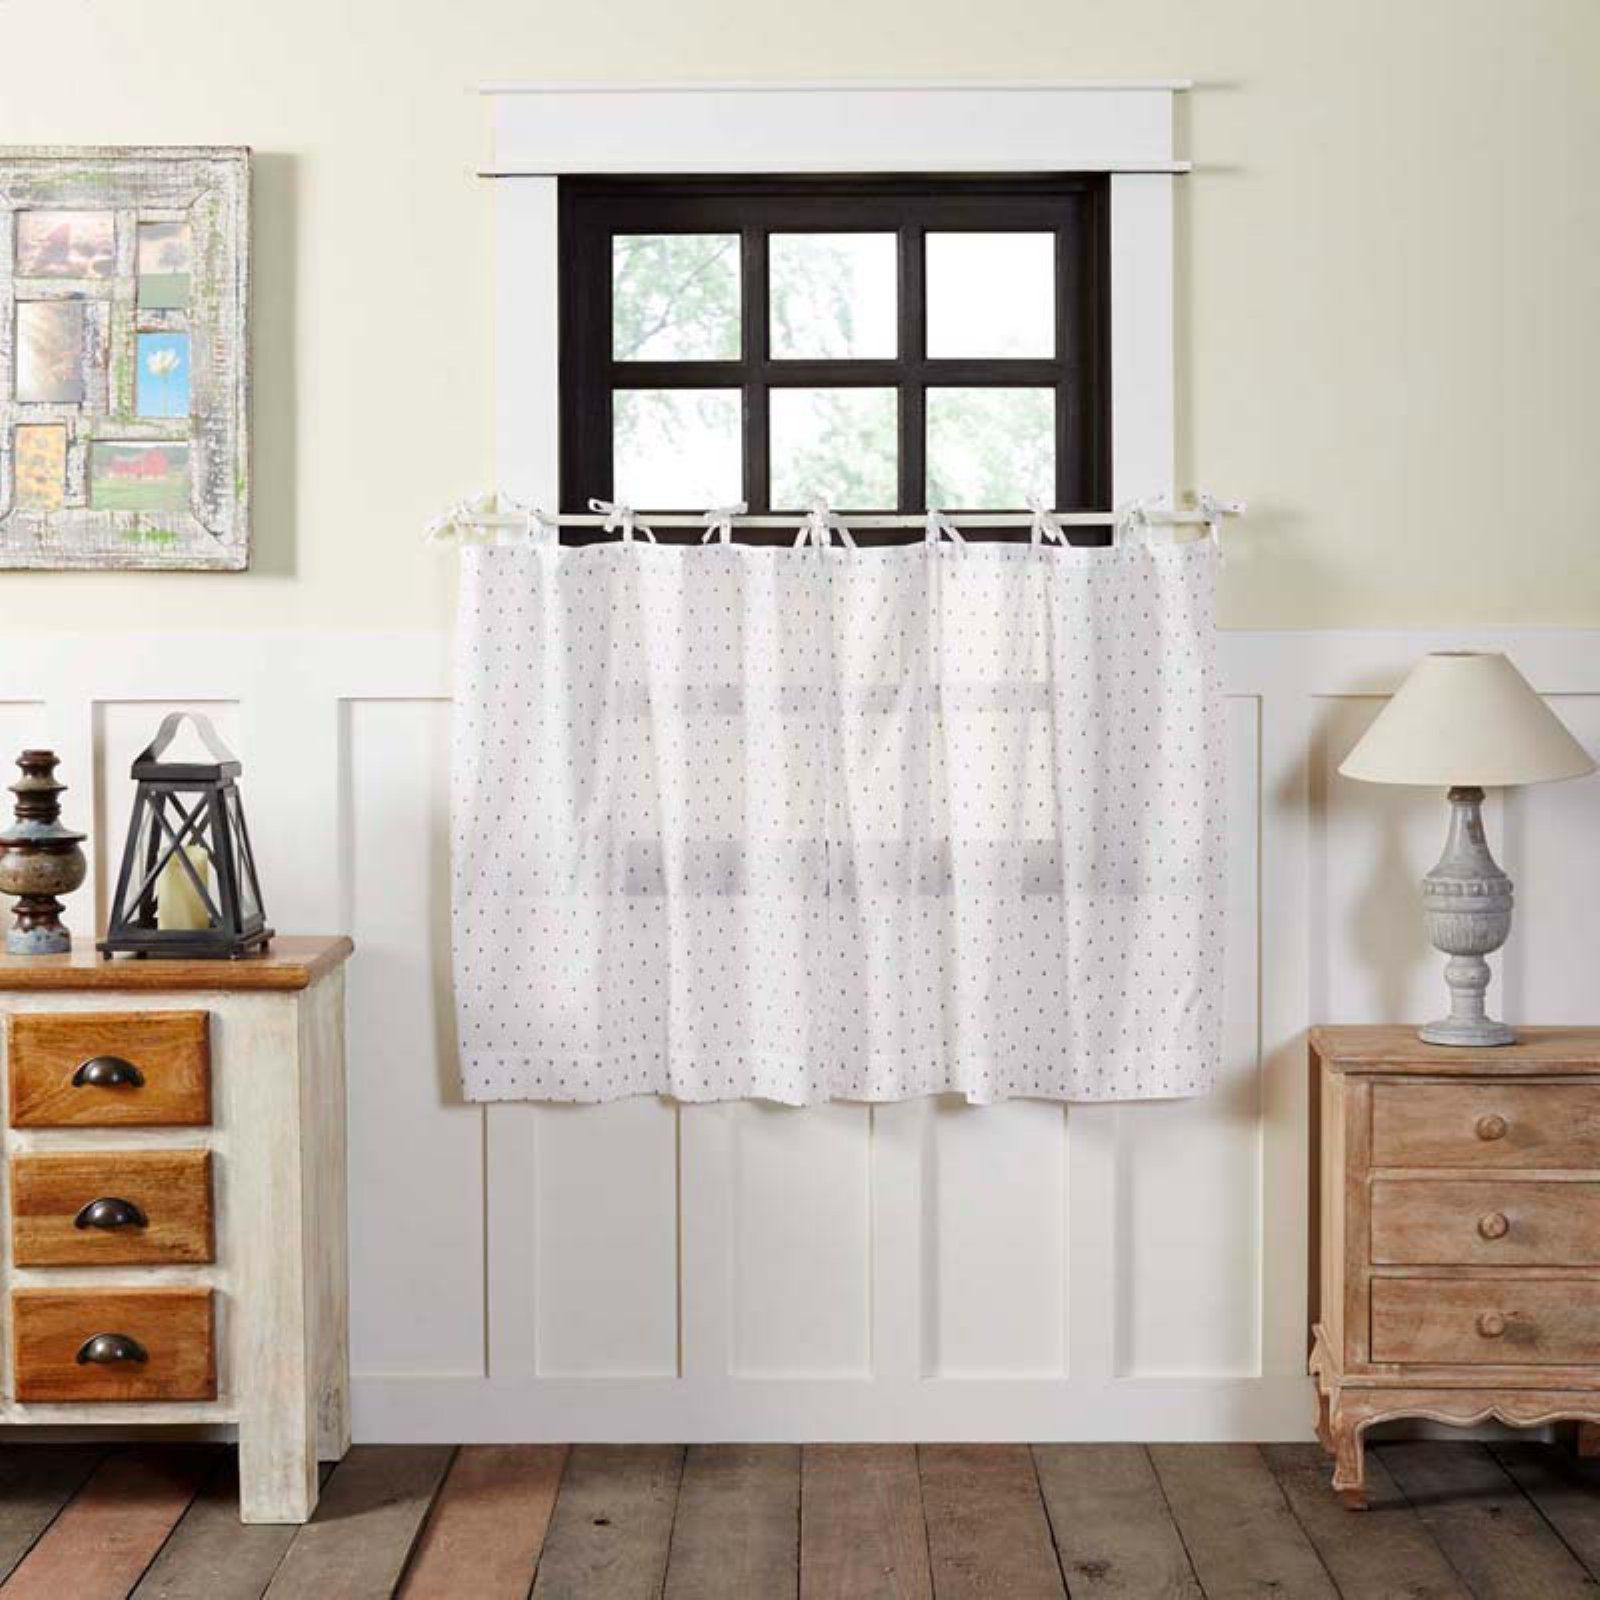 Vhc Brands Malyn Tie Top Curtain Tier Set | Products In 2019 For Farmhouse Stripe Kitchen Tier Pairs (View 18 of 20)